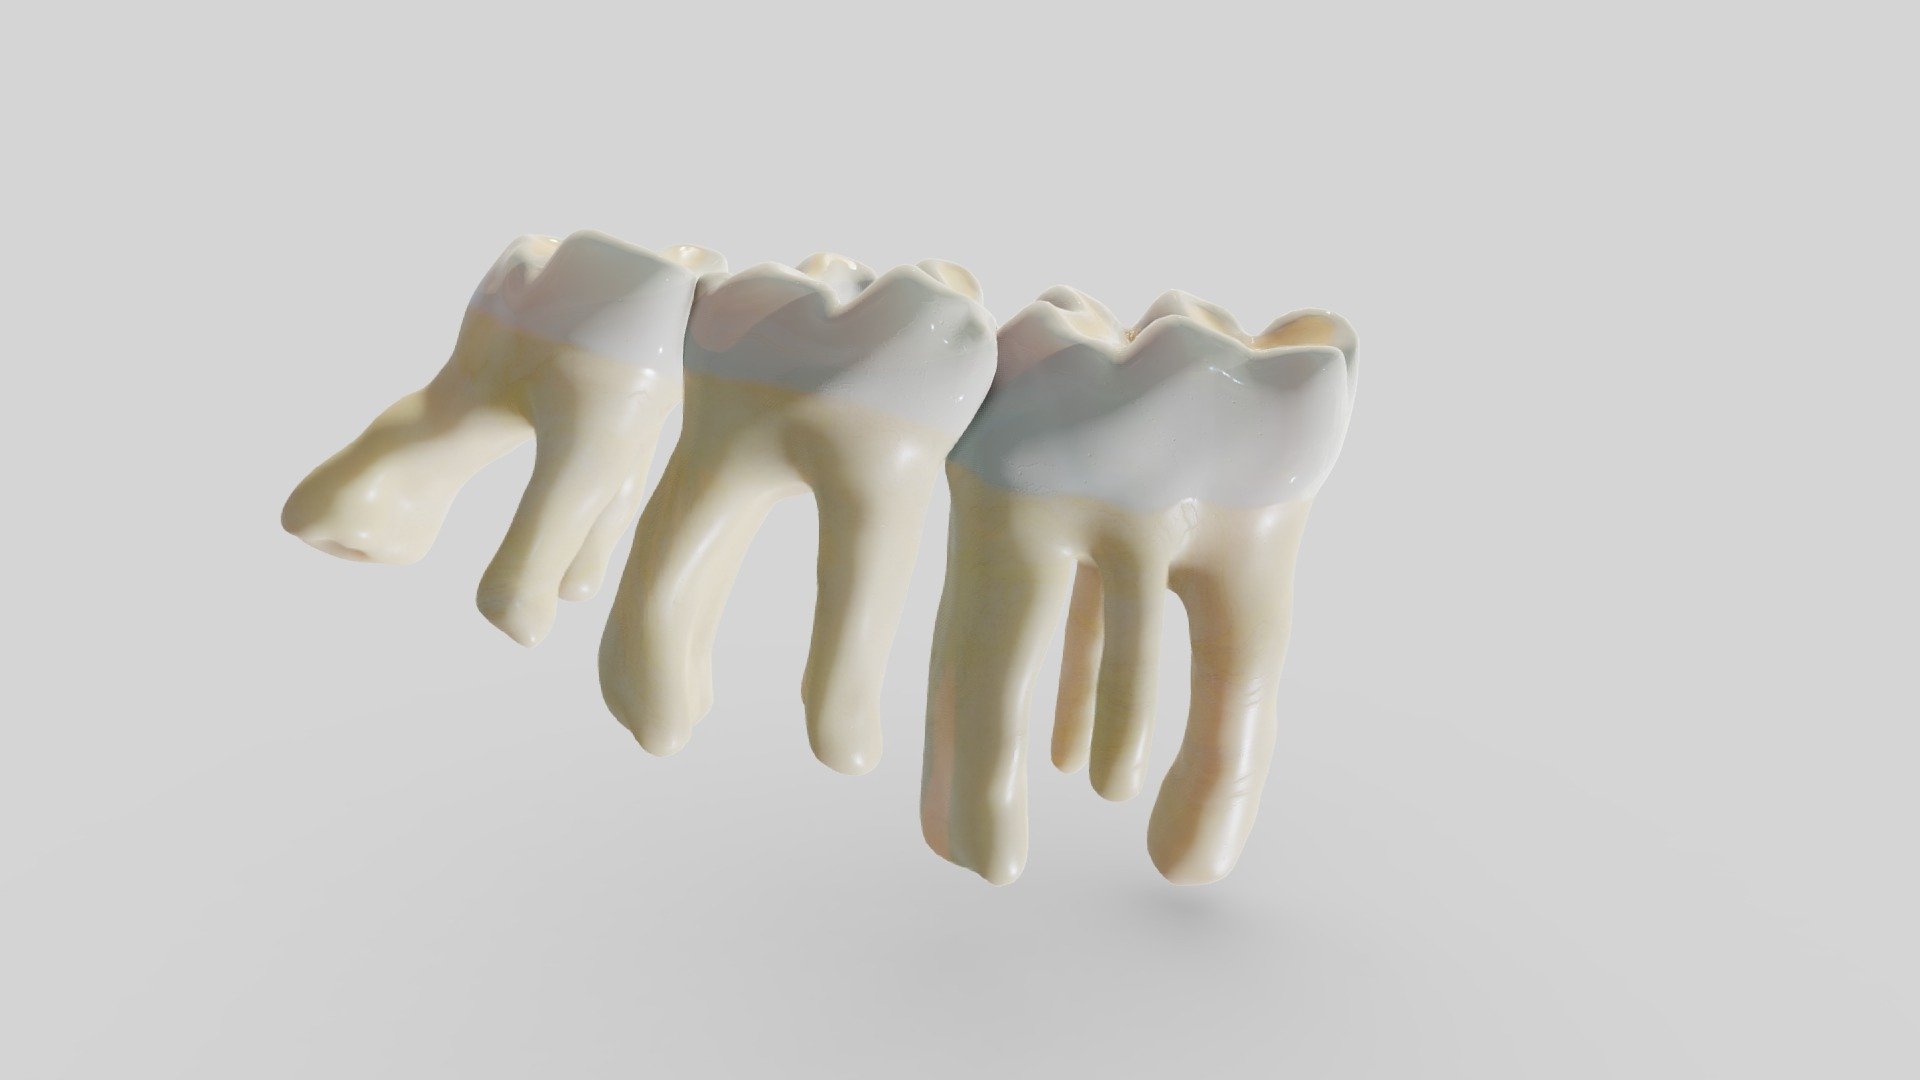 Working on the anatomical rat again. These are the lower molars from the right jaw 3d model